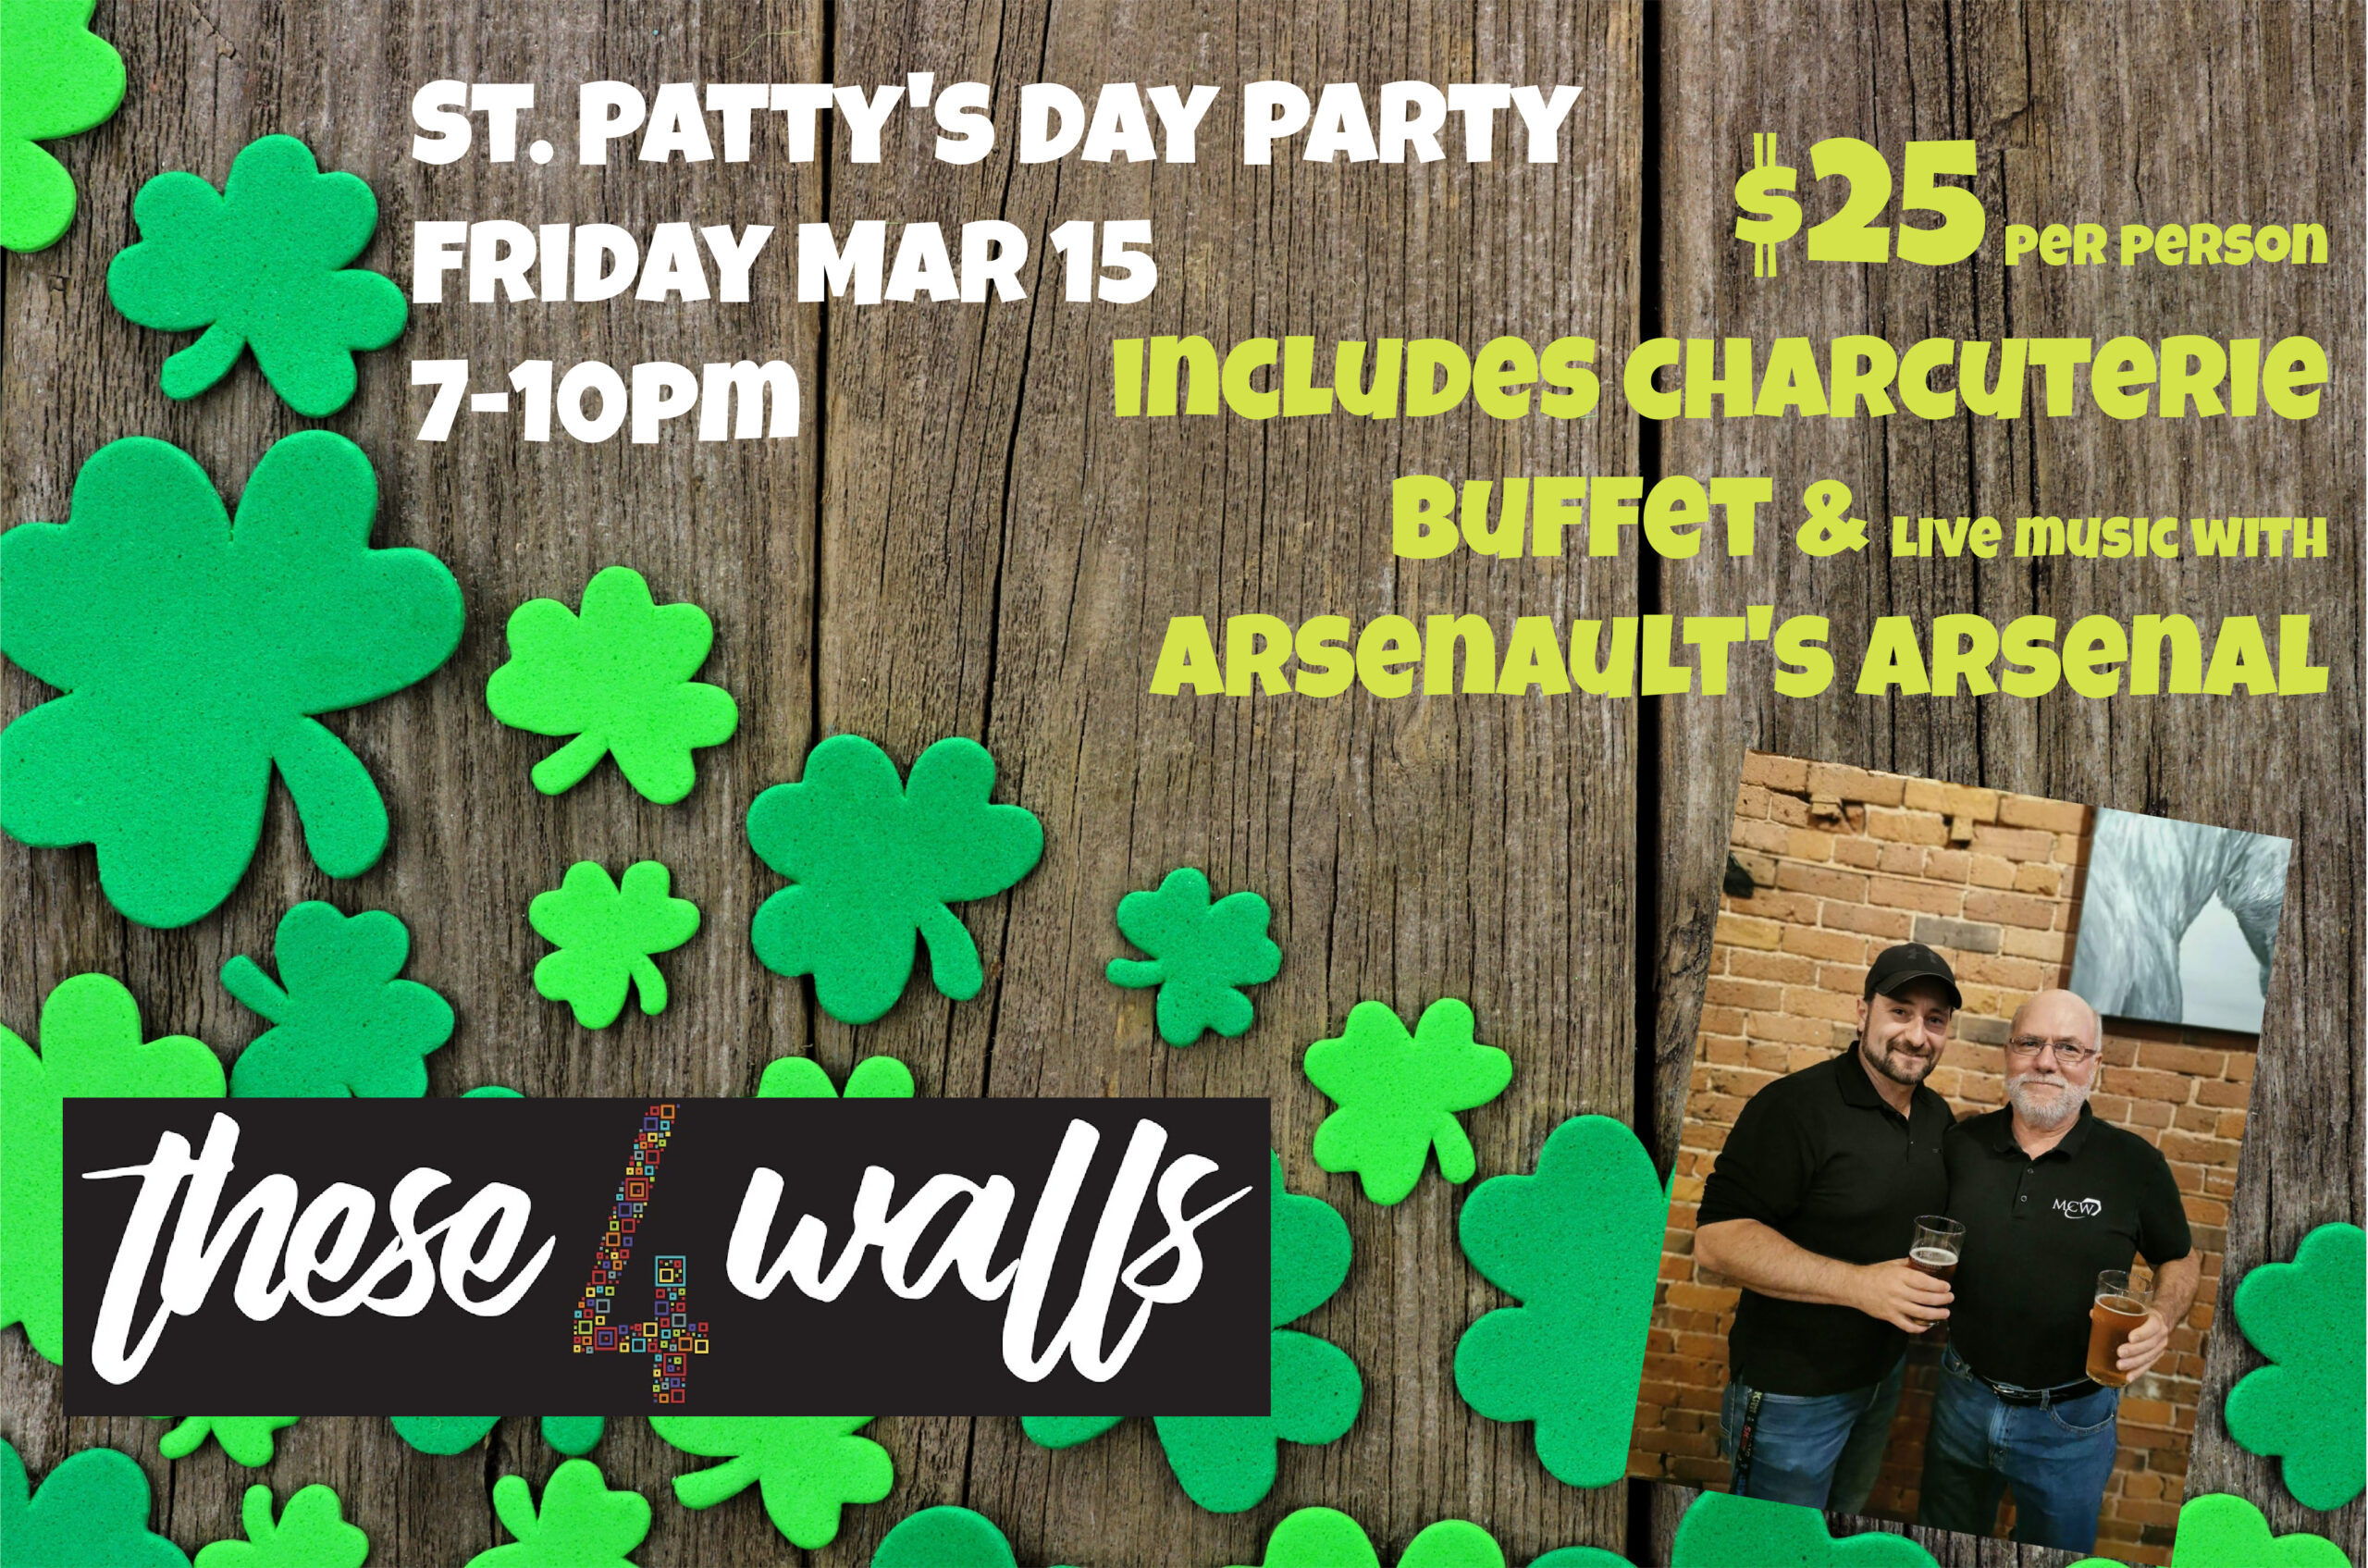 st pattys day themed poster with 4-leaf clovers and a picture of the performers.